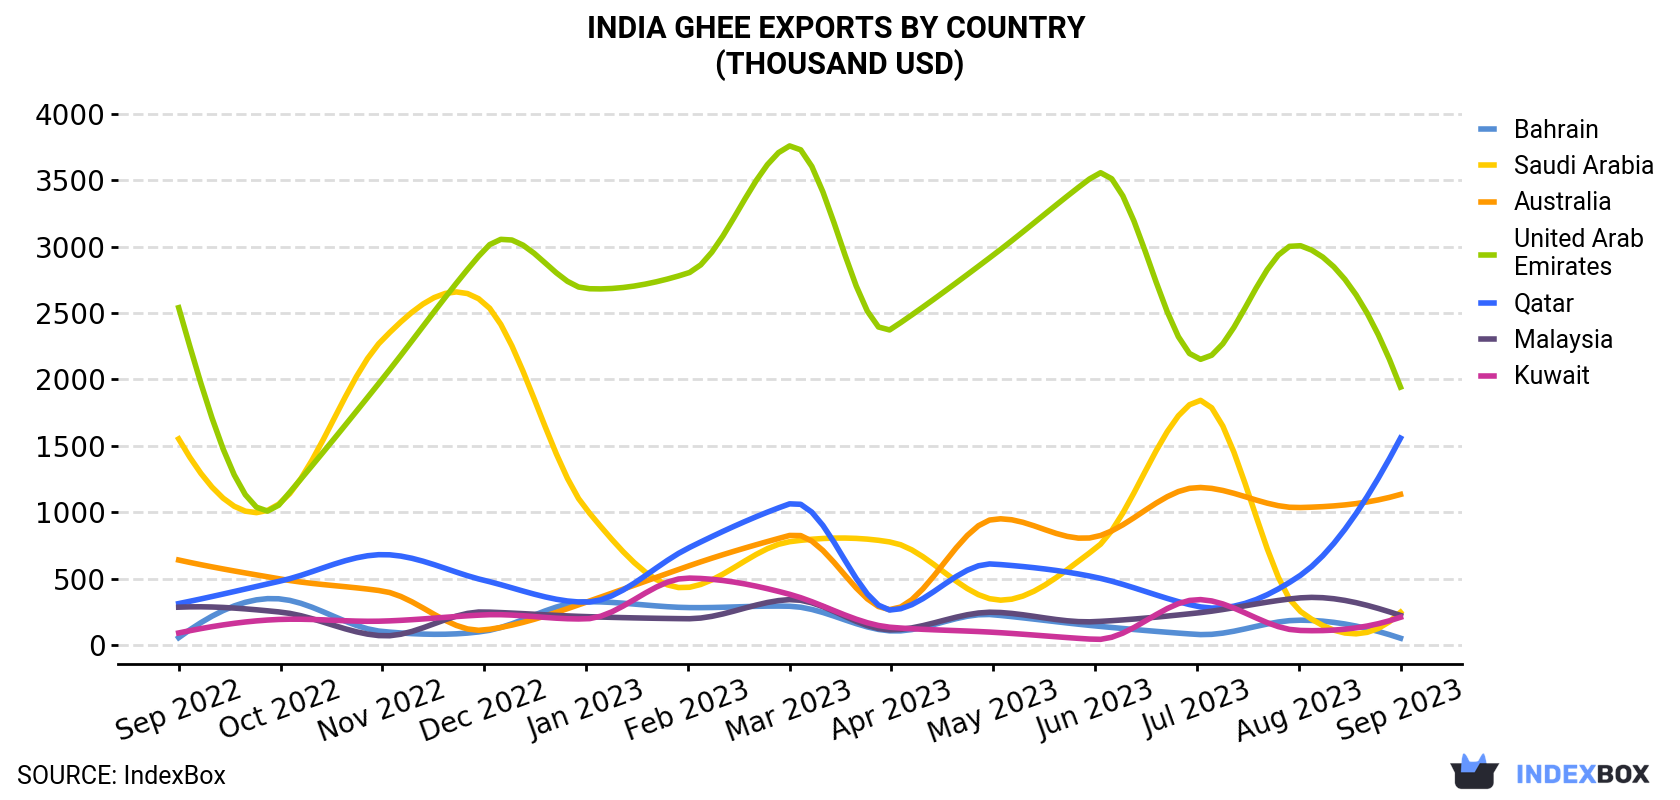 India Ghee Exports By Country (Thousand USD)